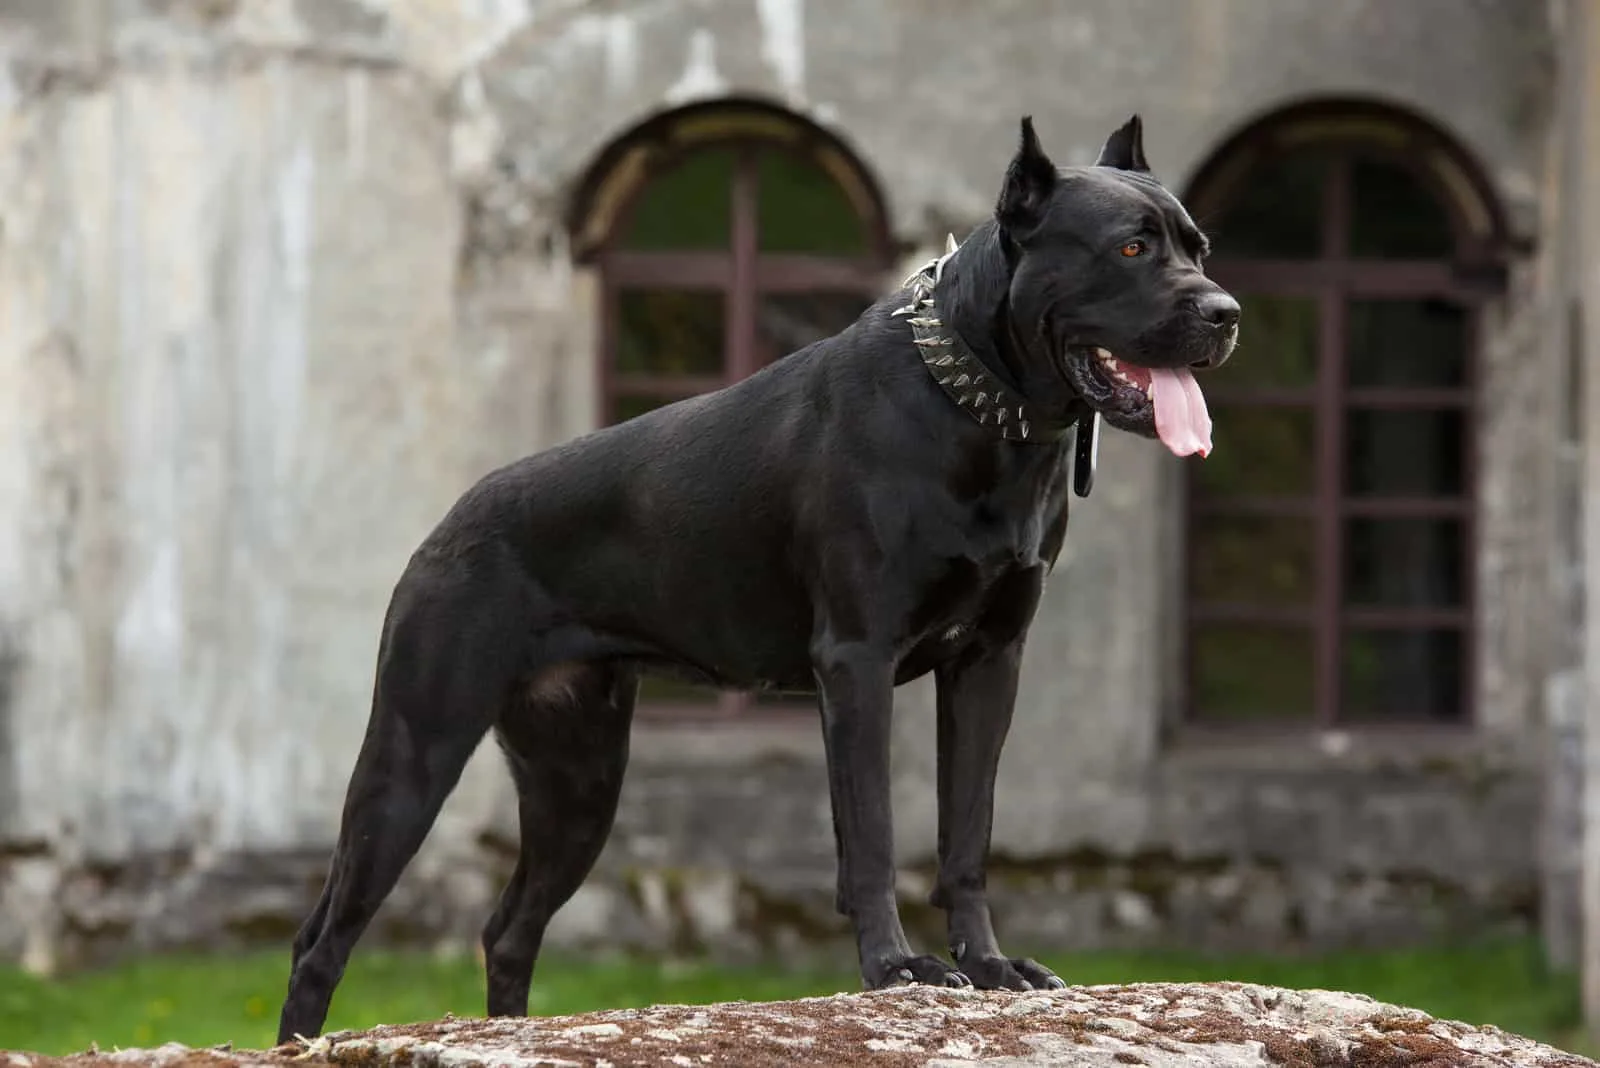 cane corso standing outside with on house behind